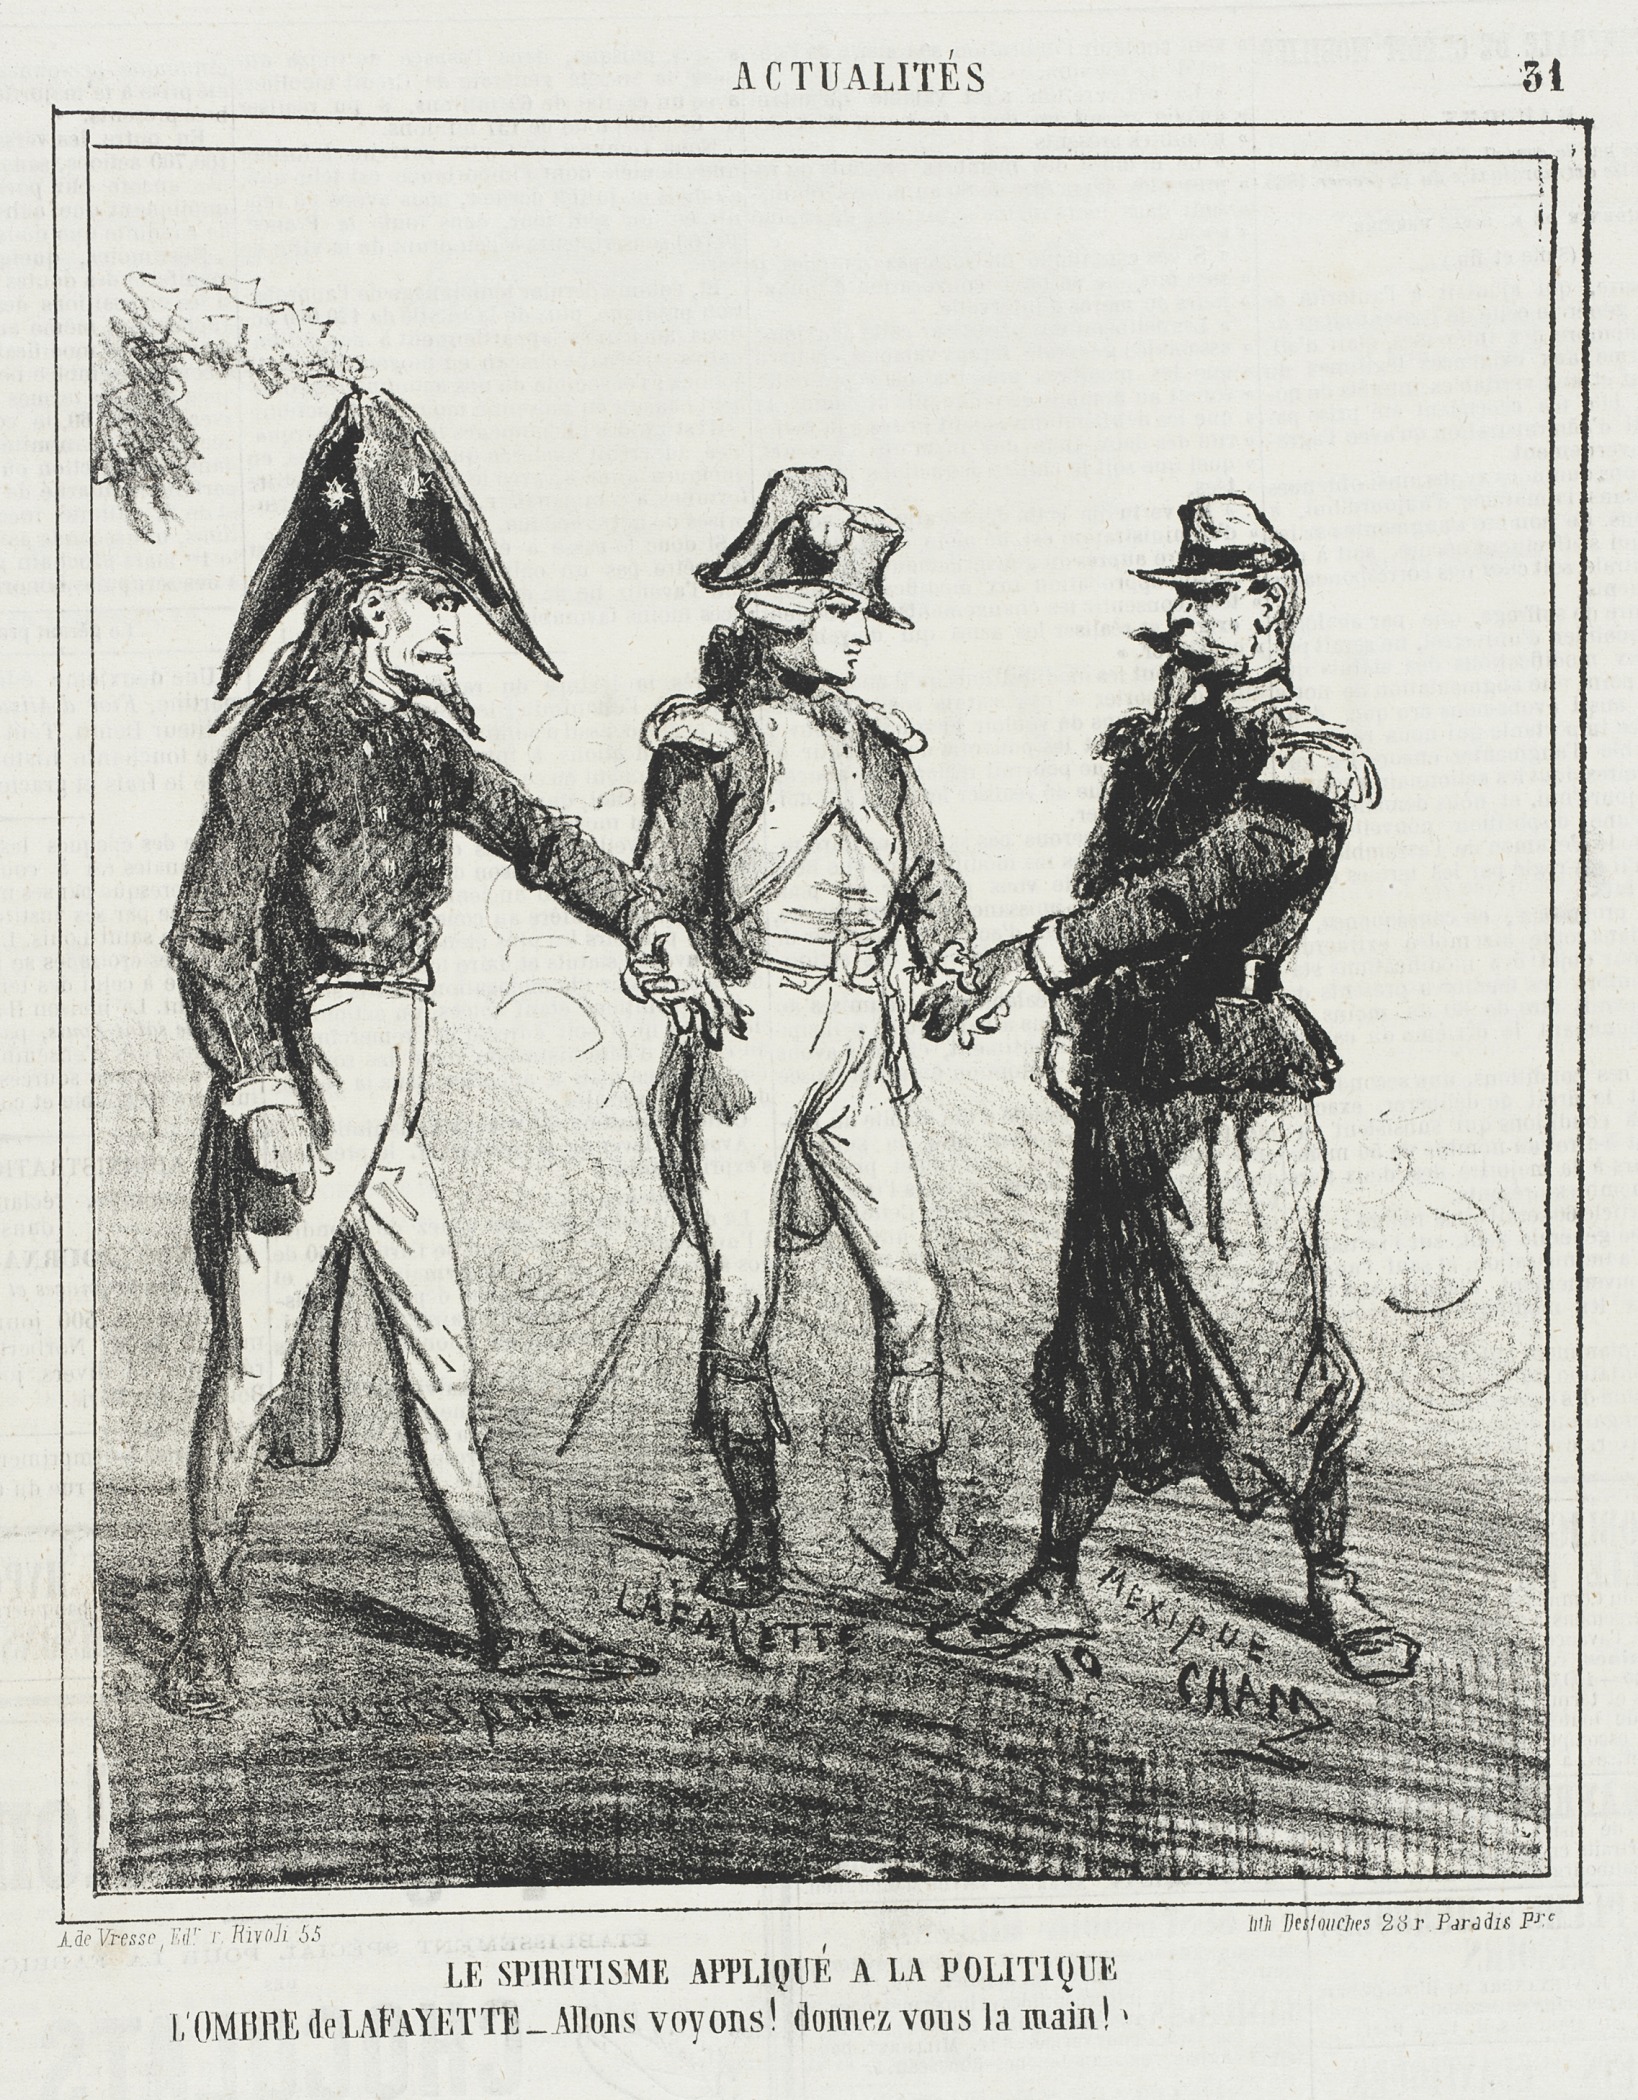 a cartoon showing three men wearing period clothes